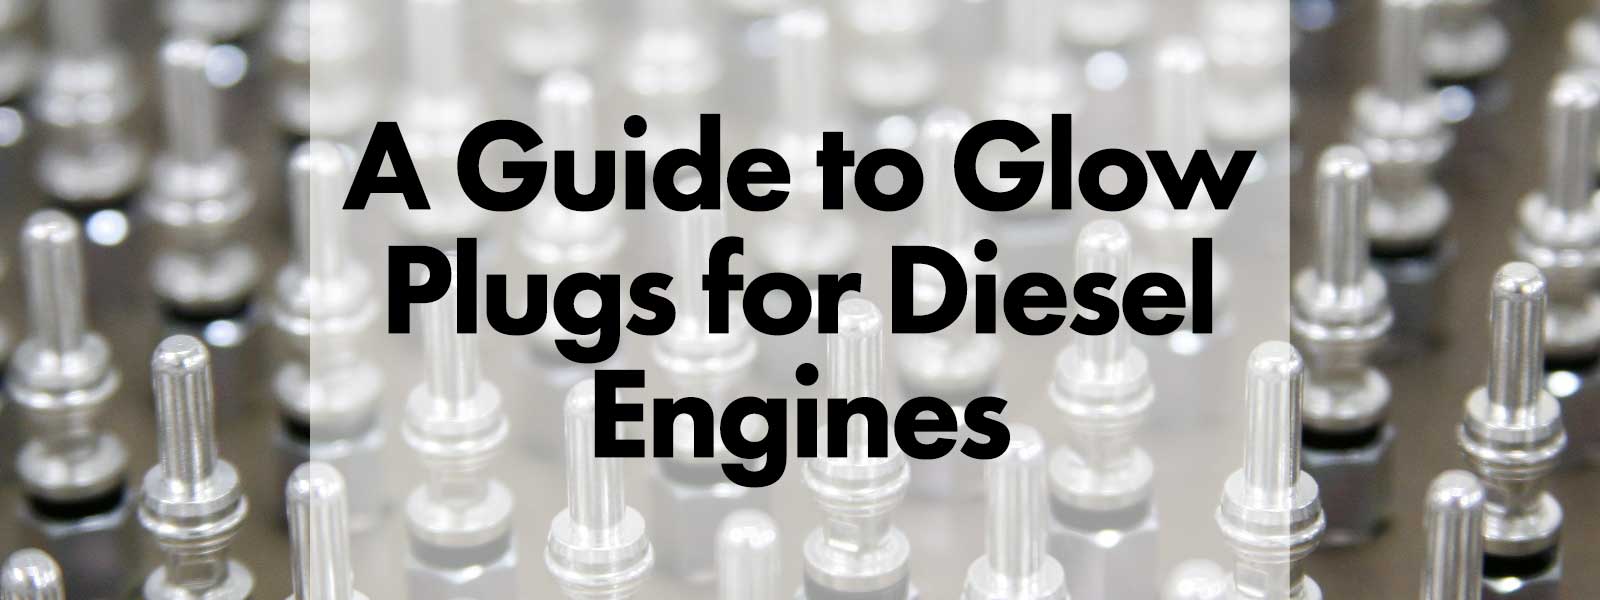 A Guide to Glow Plugs for Diesel Engines